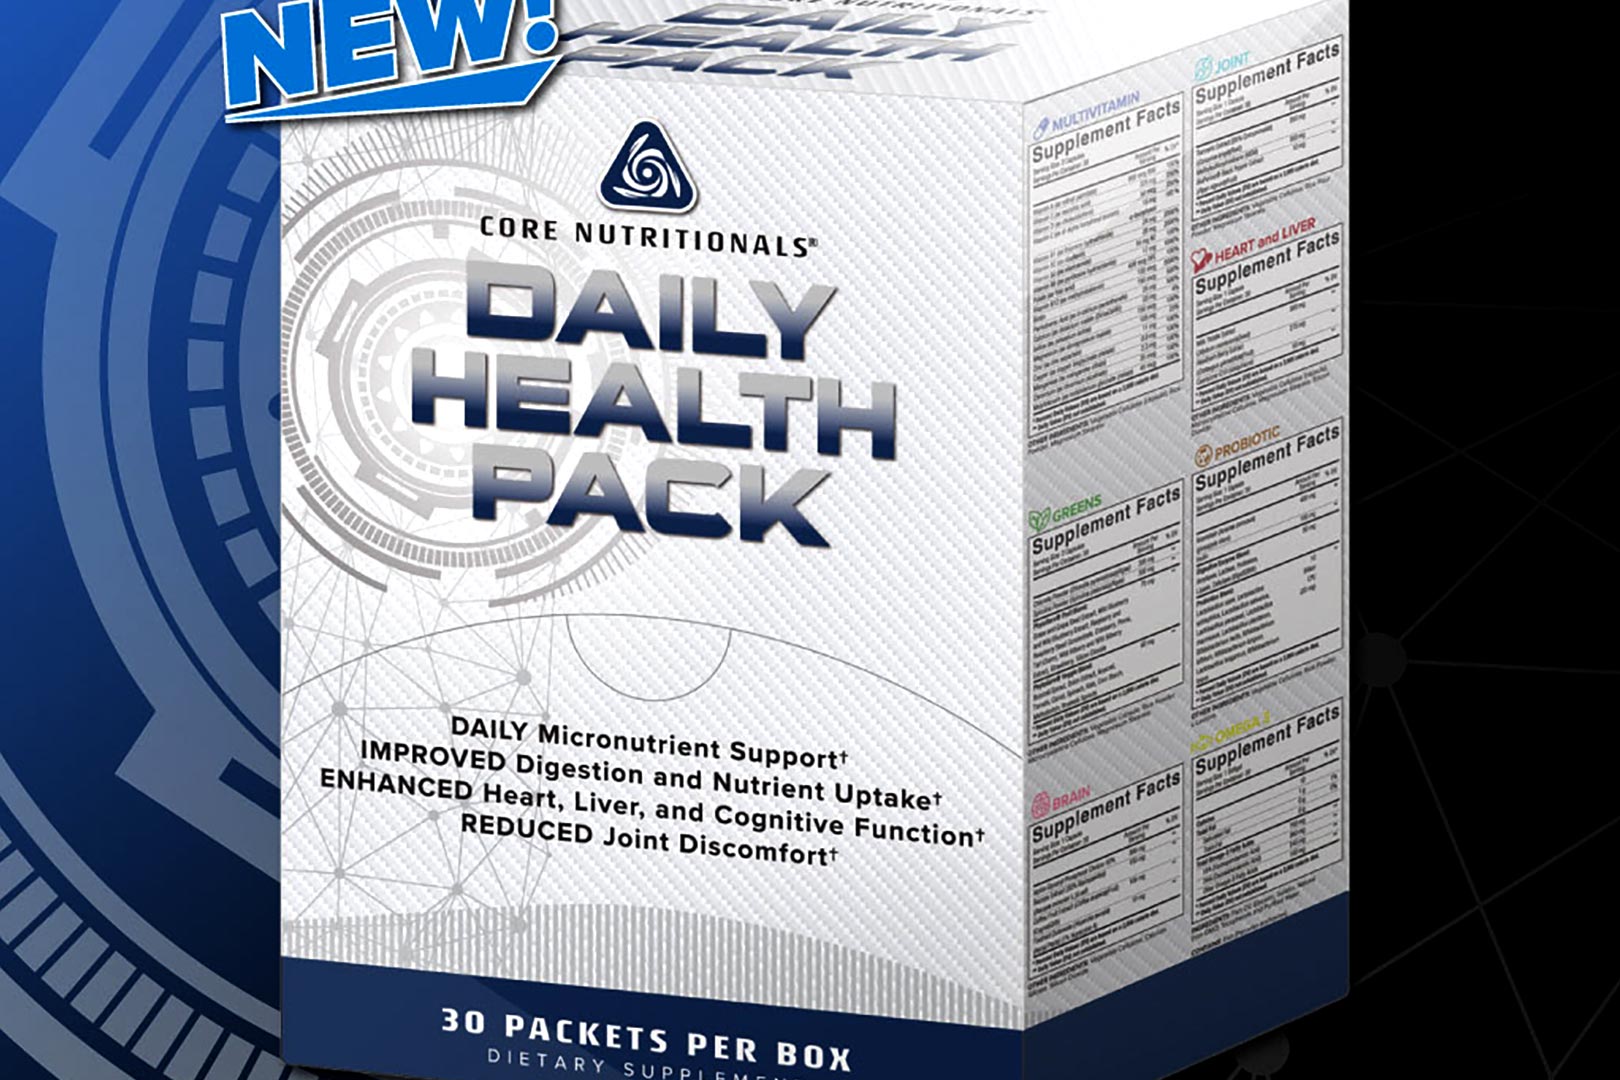 Core Nutritionals Daily Health Pack